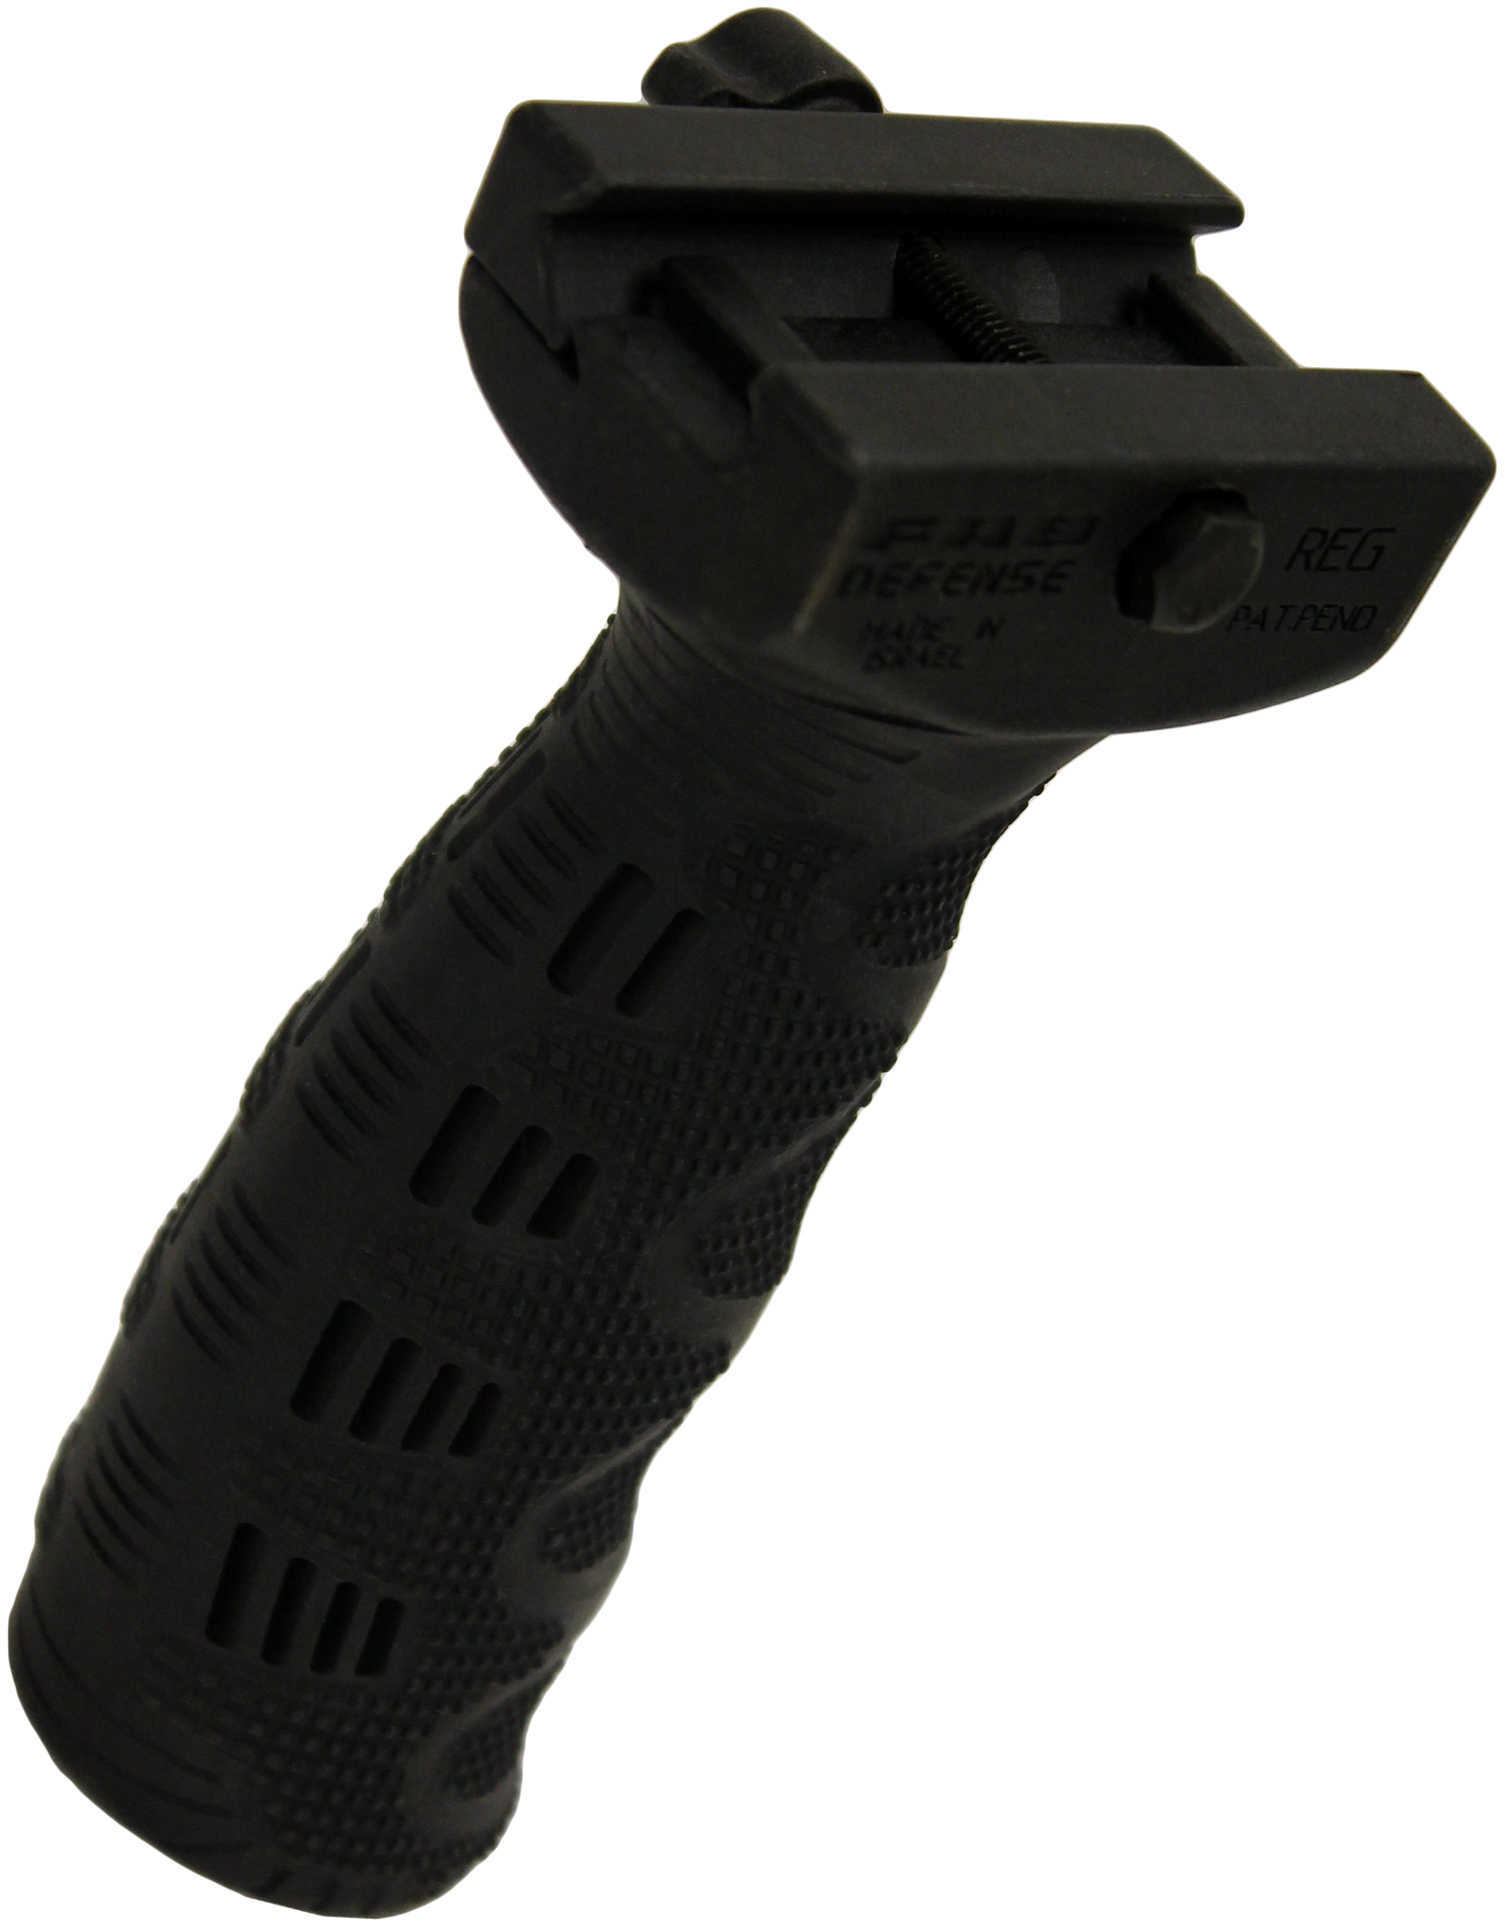 Mg Rubber Overmold Foregrip